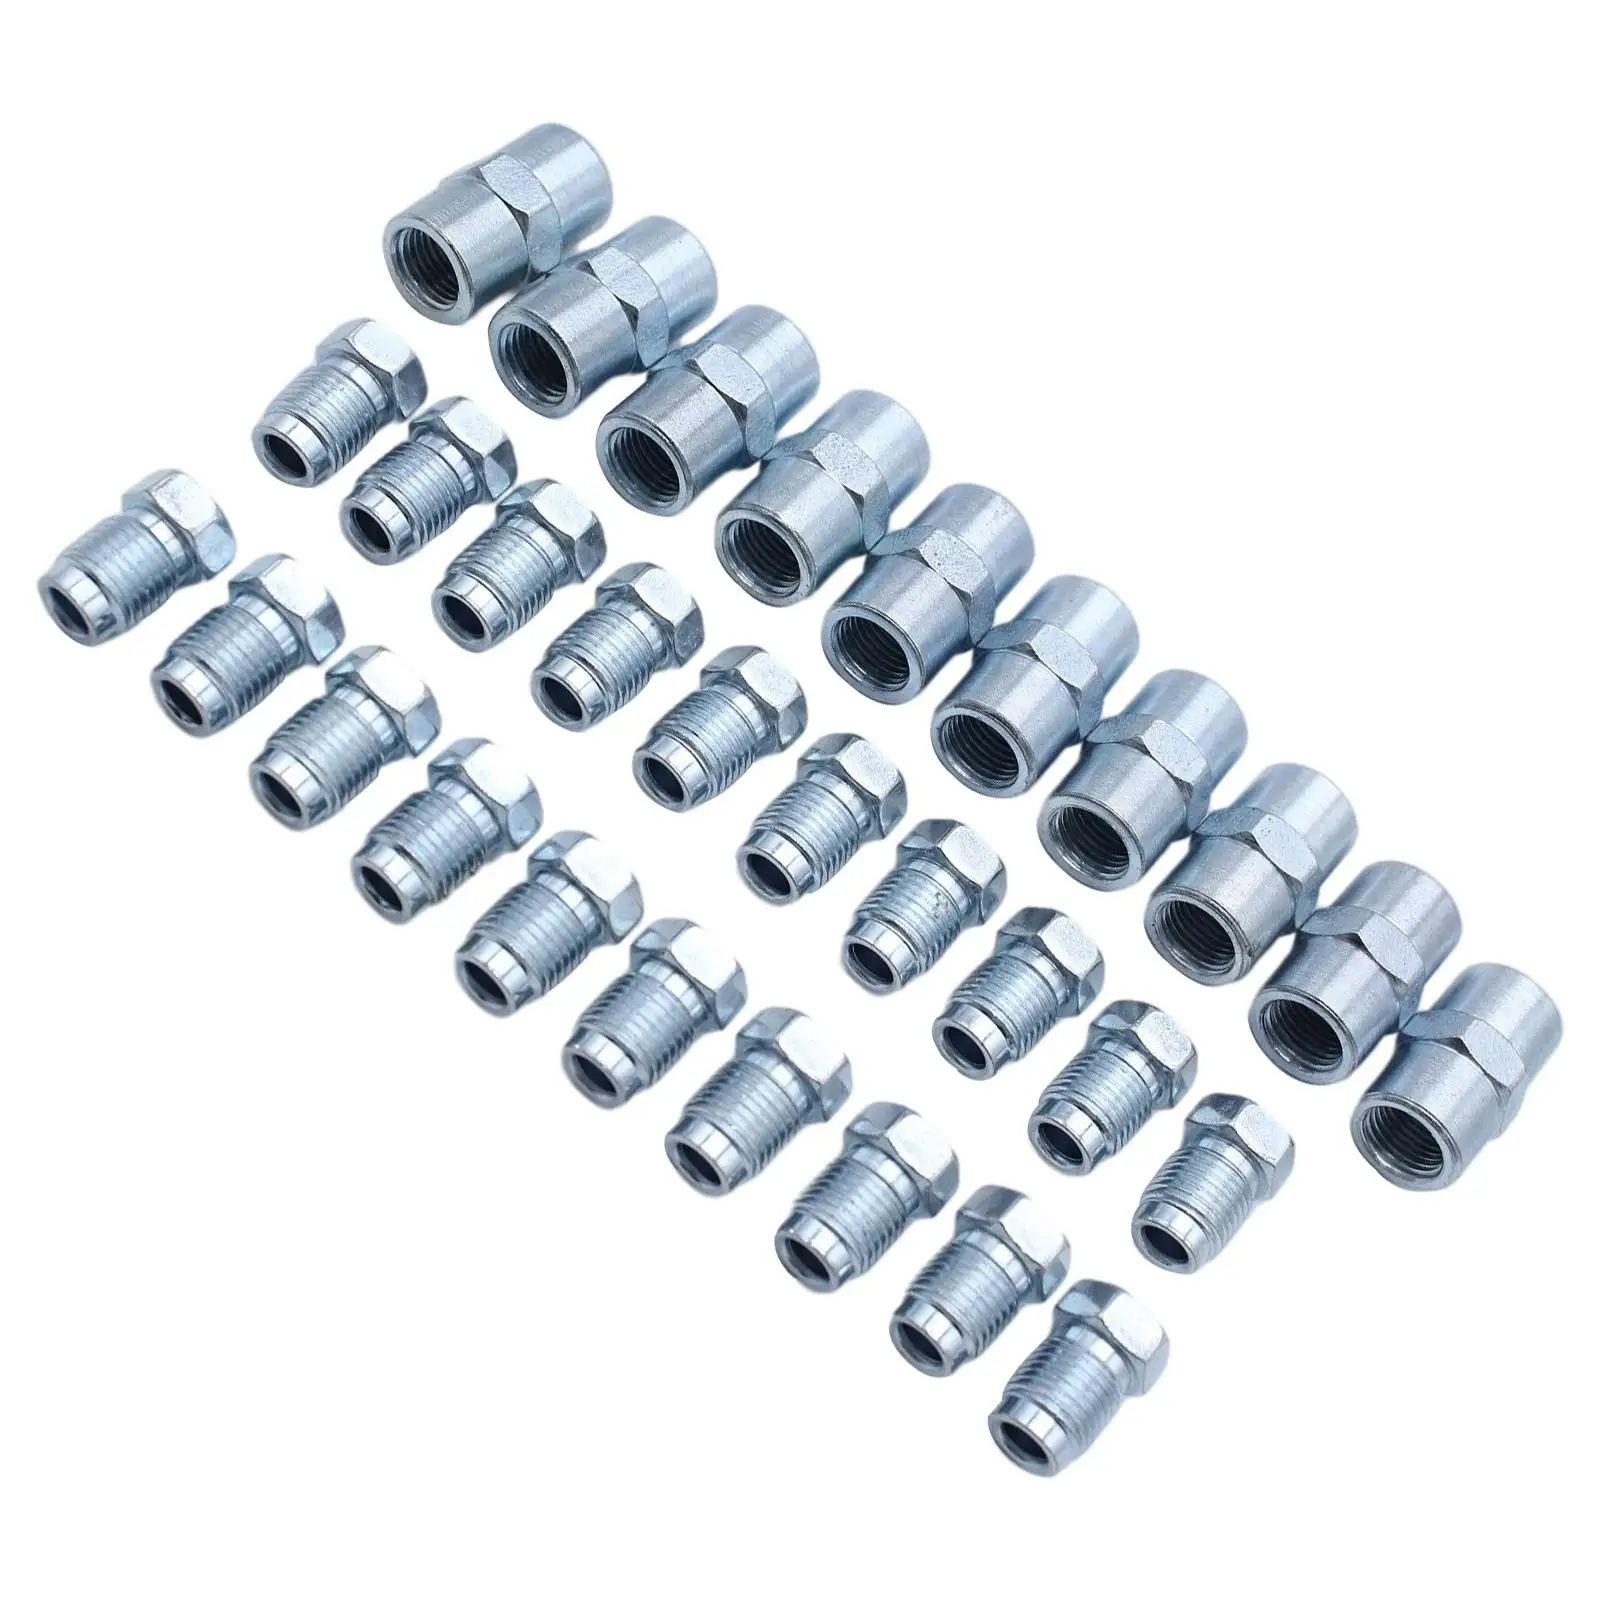 Car Fittings Assortment 20 Screws 10 Connector Fits for 4.75mm Brake Line   Spare Parts Professional 24mm Long Premium